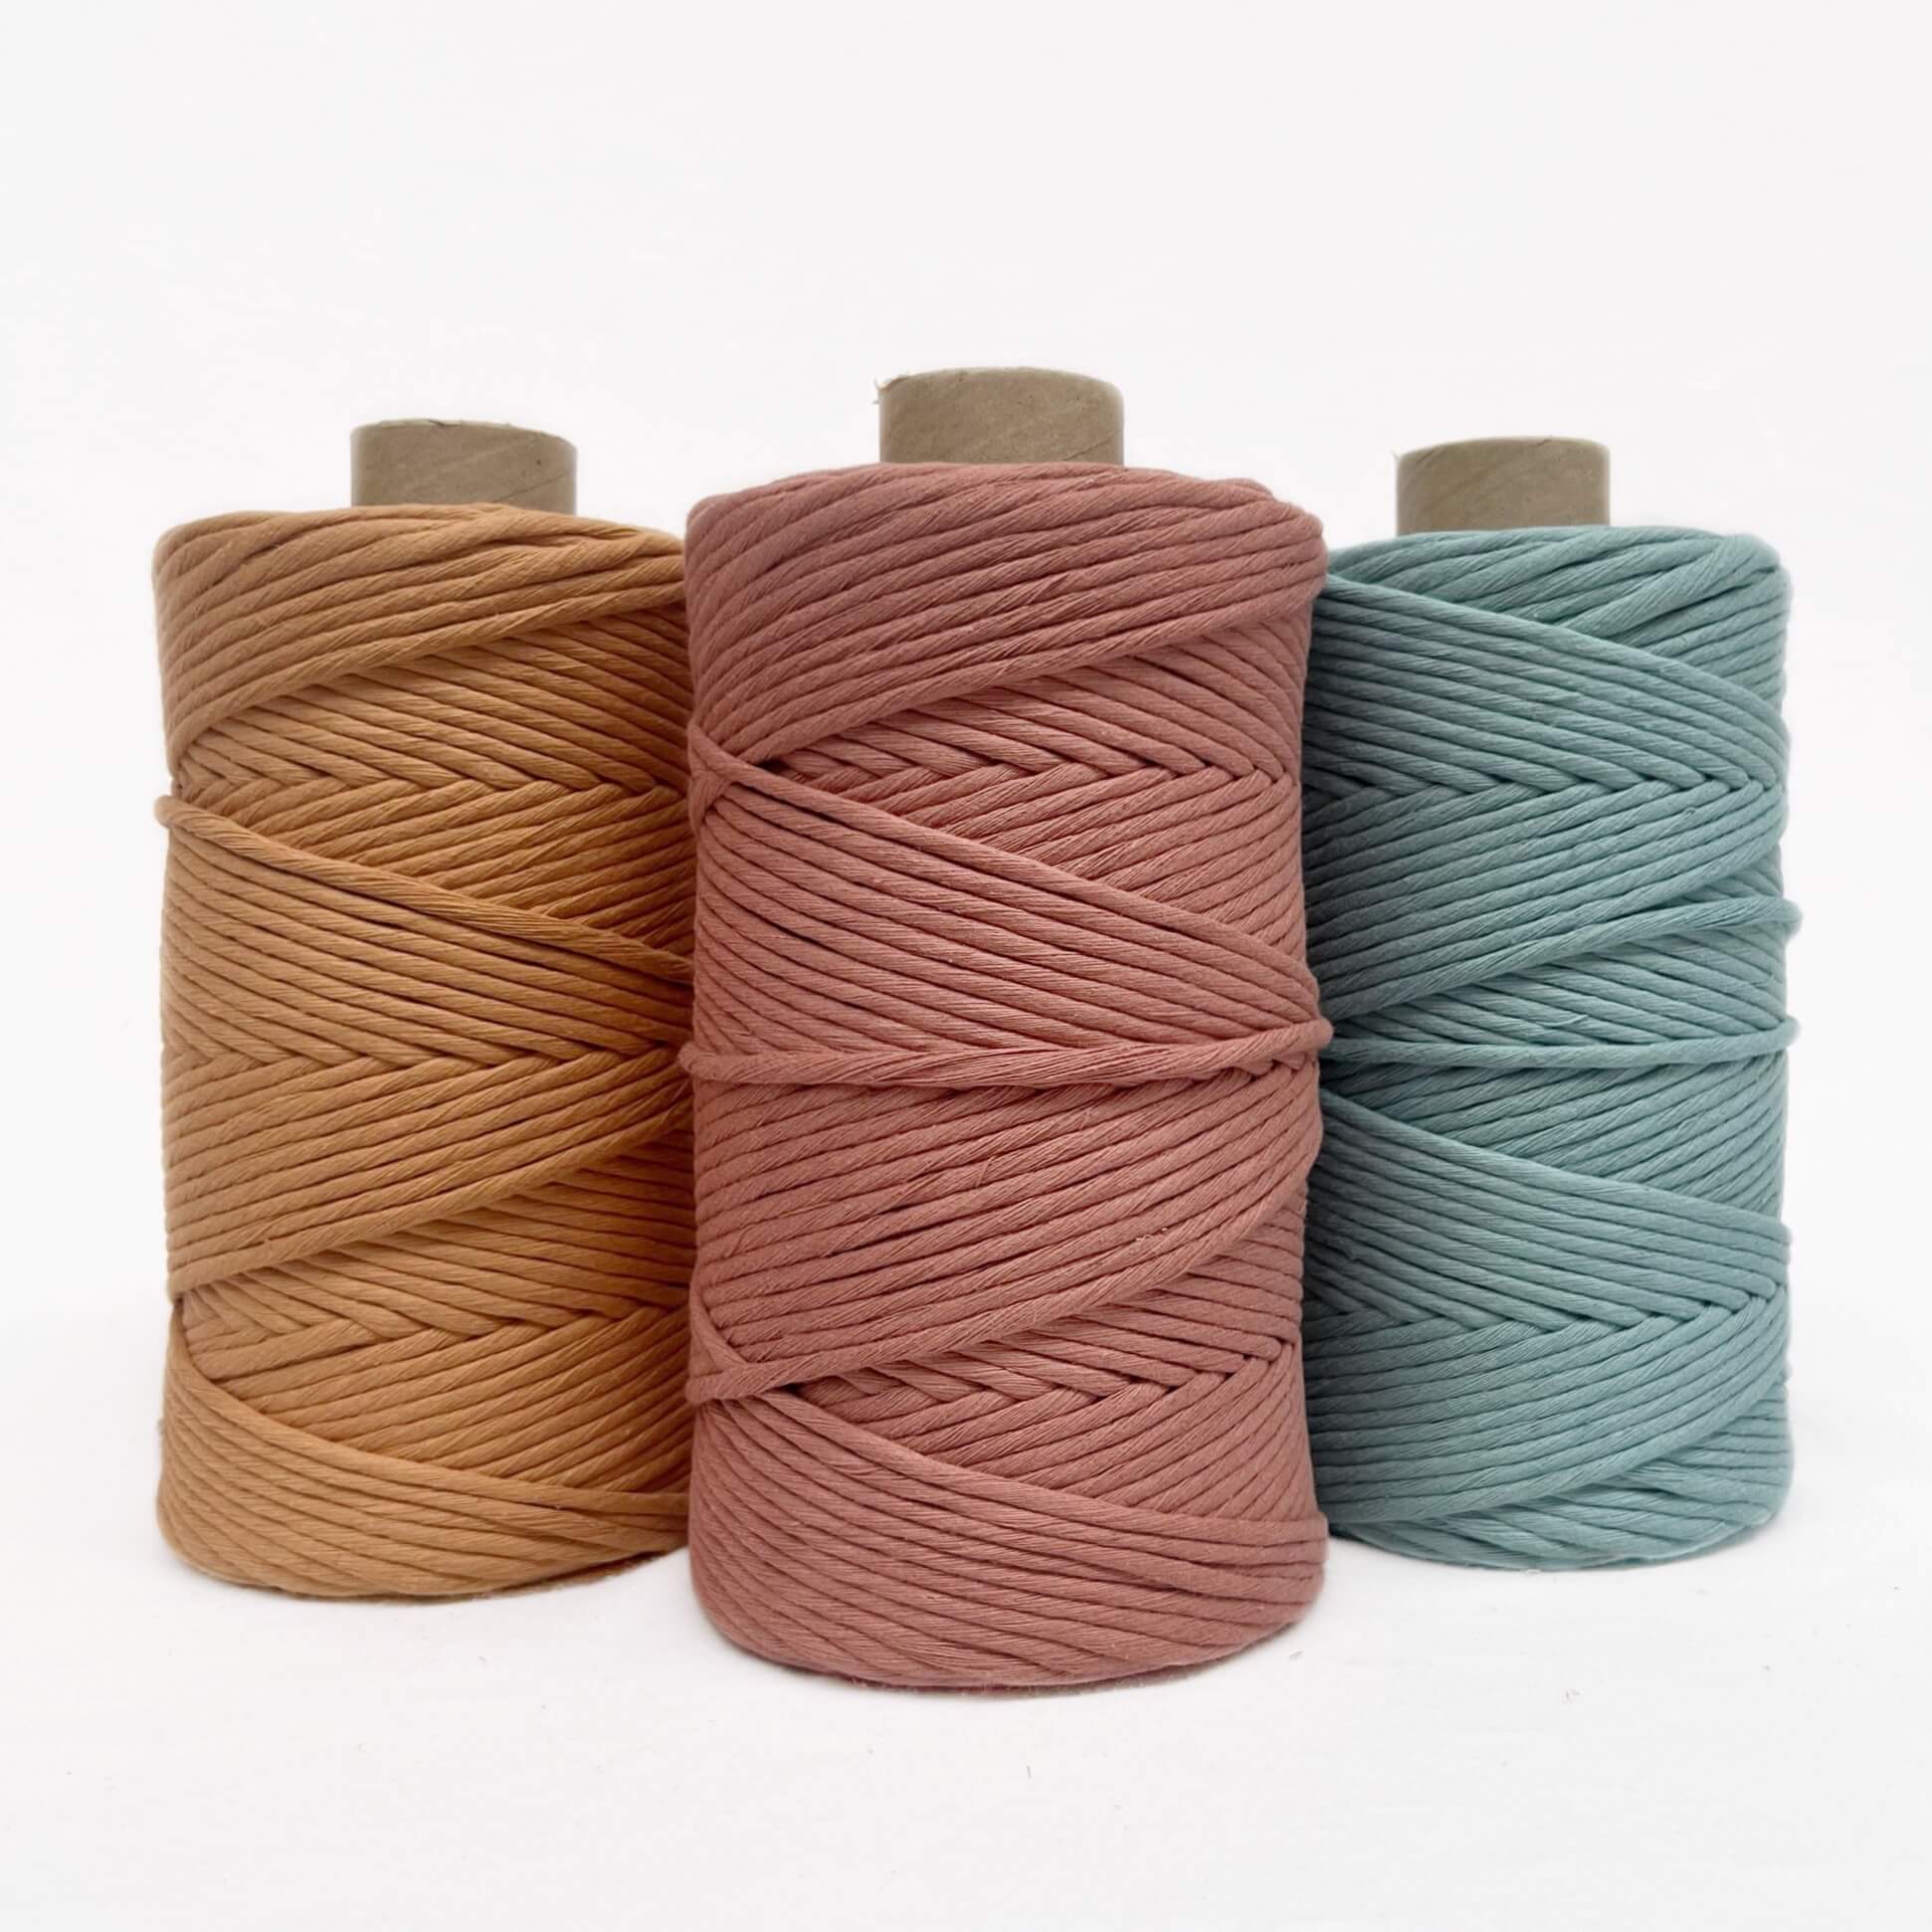 Luxe 5 mm Cotton Rope & String